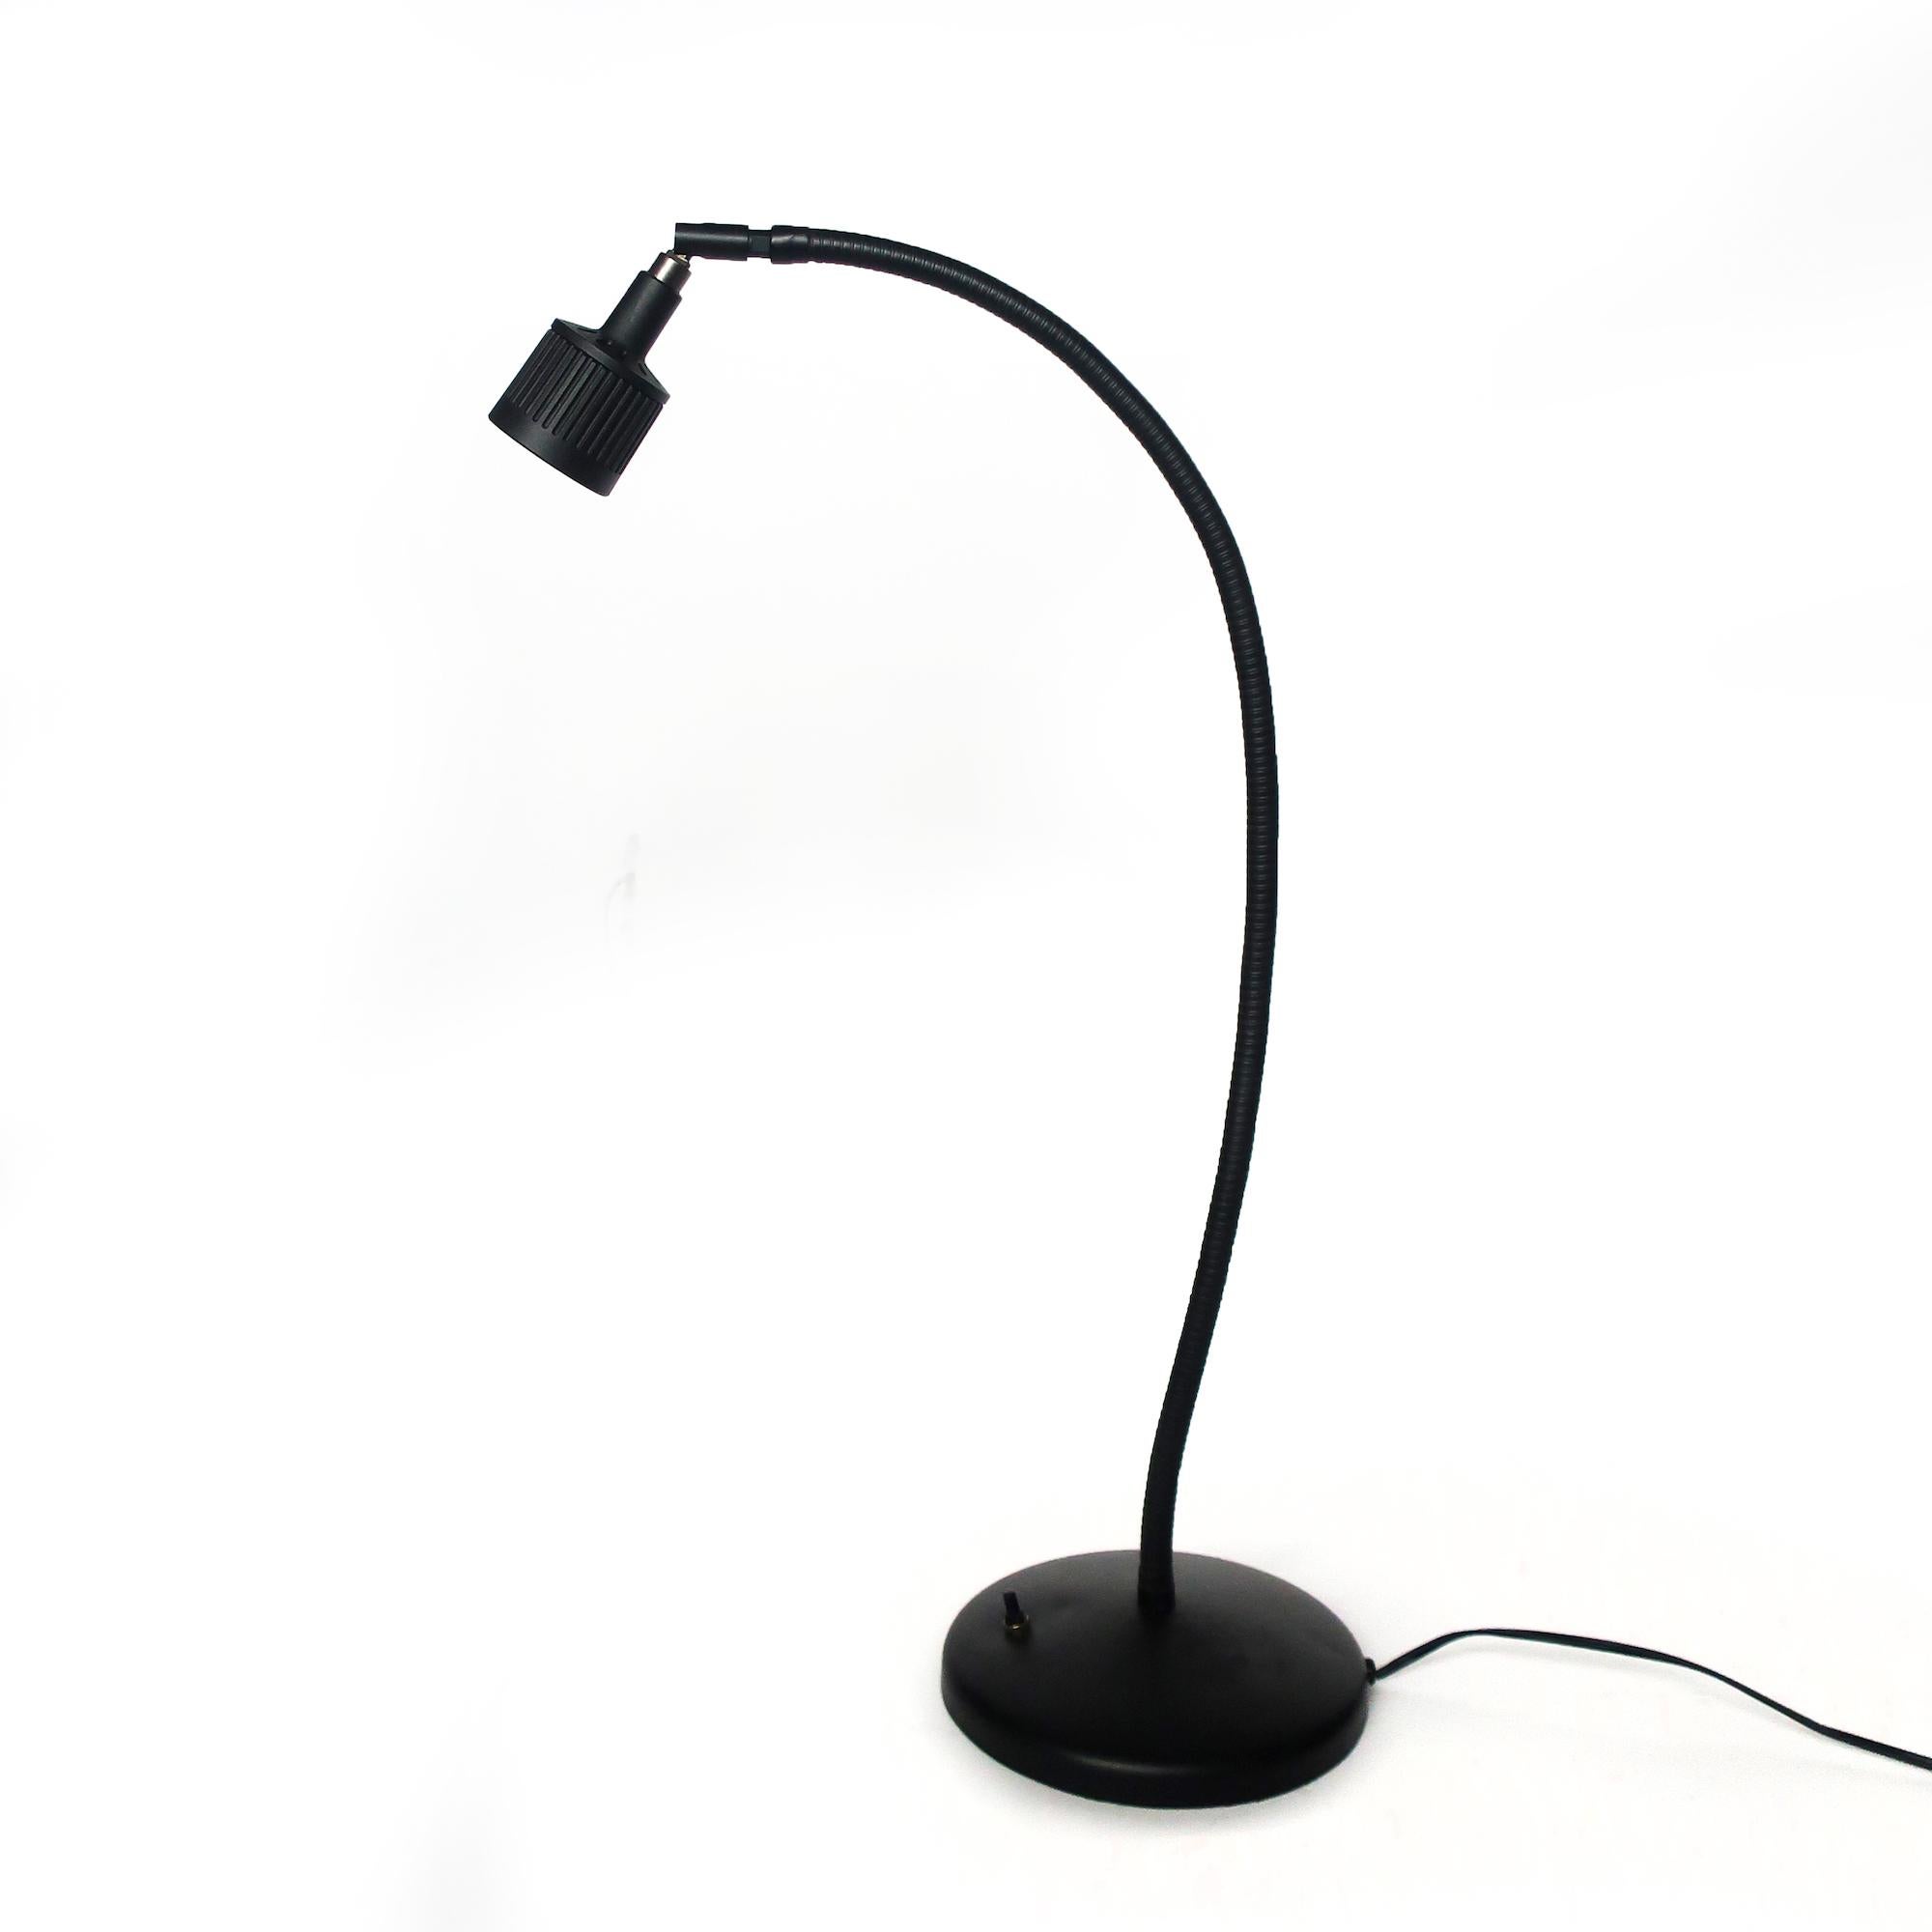 A vintage black Sunnex gooseneck desk lamp that is perfect for a Minimalist, Mid-Century Modern, or postmodern 1980s inspired home or office. Round metal base, on/off switch on the base, and gooseneck stem. 

In good vintage condition with wear